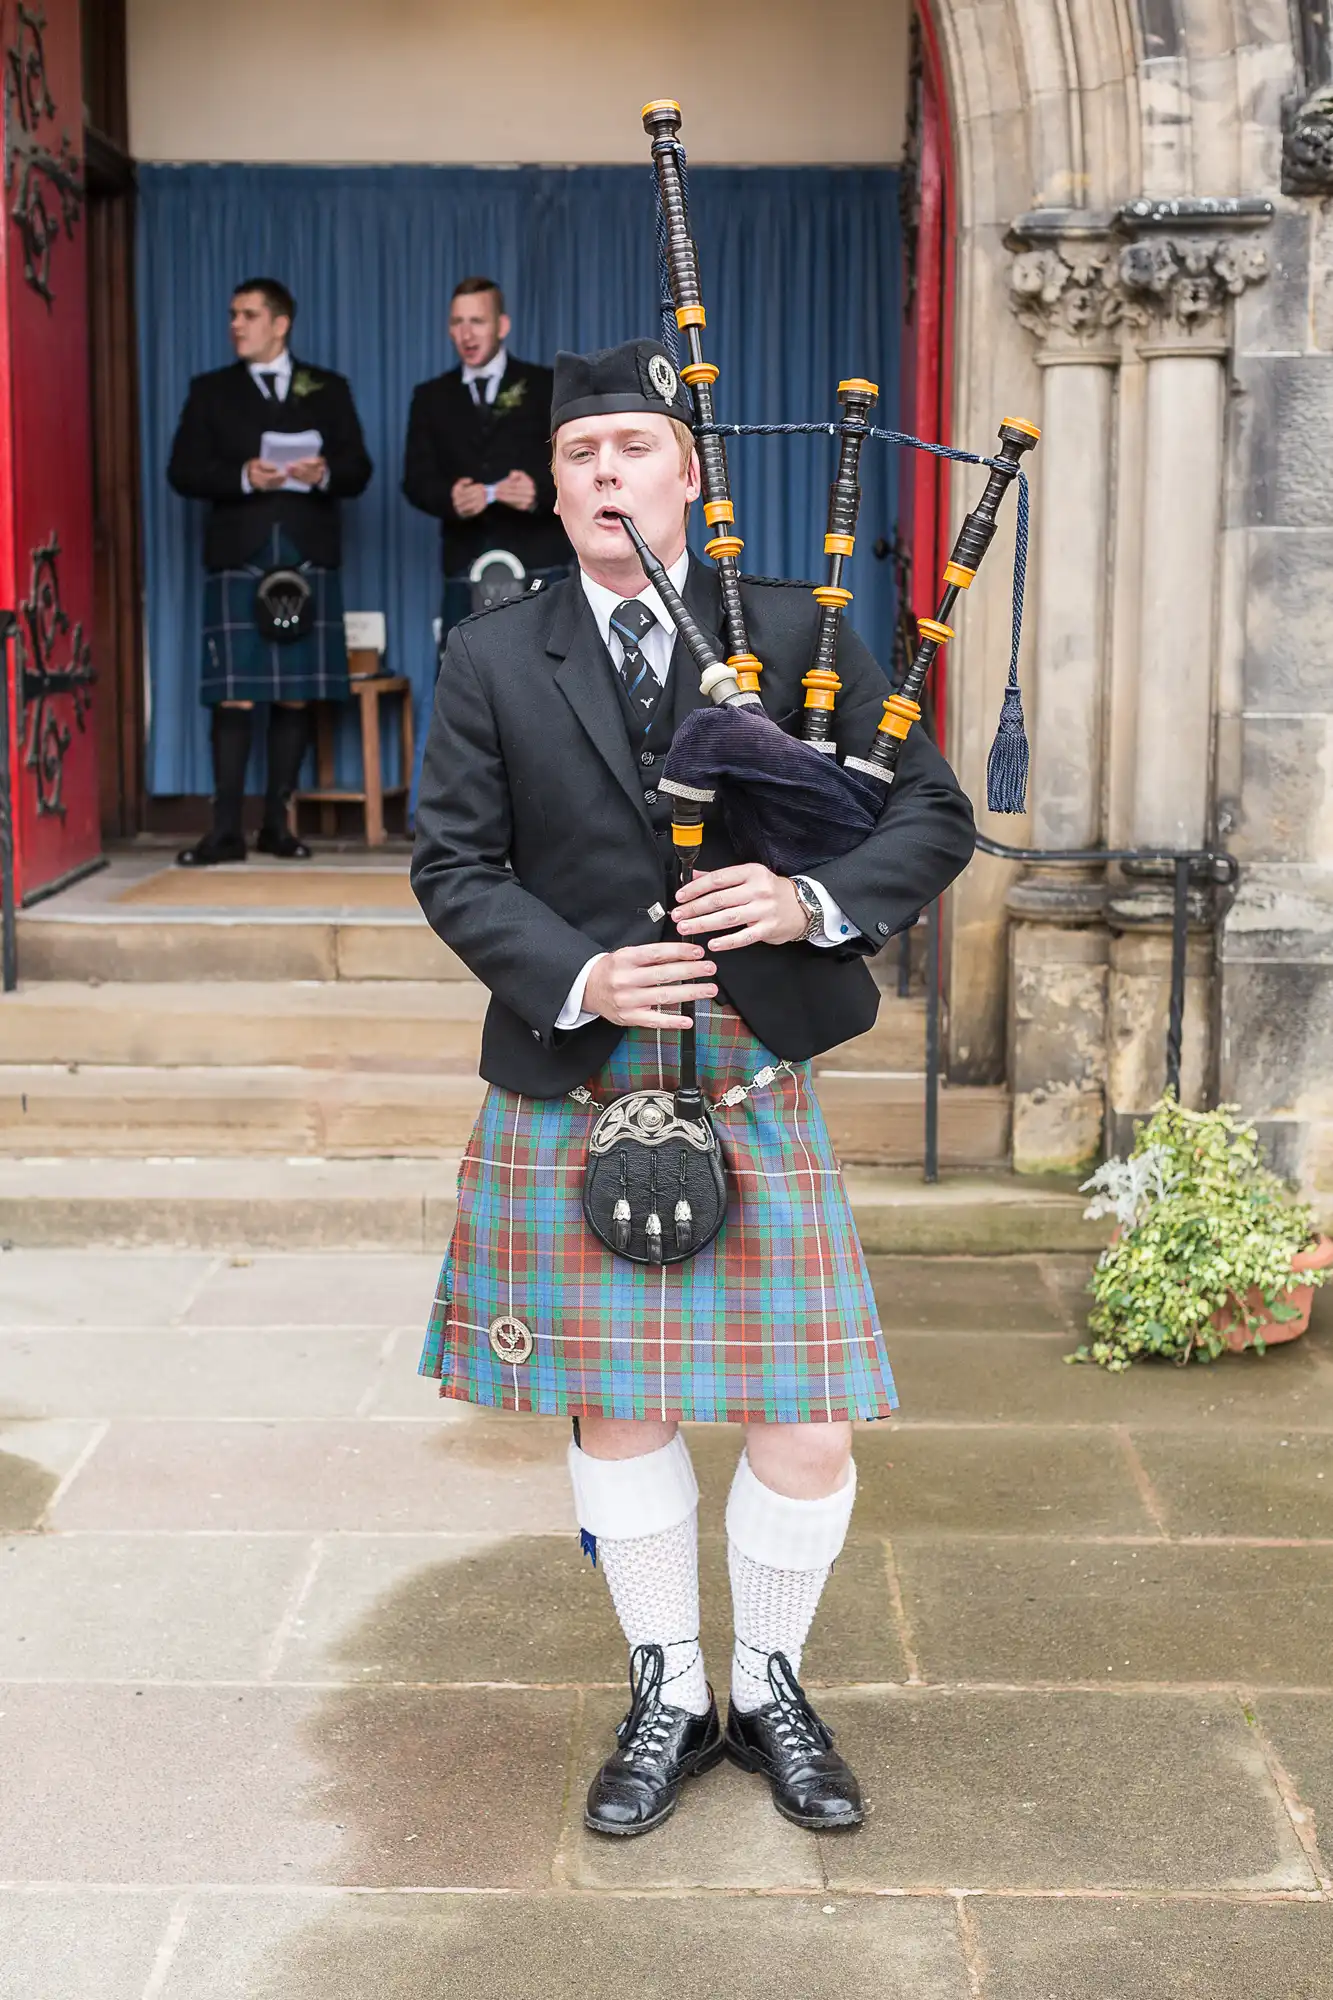 A man in traditional scottish attire plays the bagpipes at an outdoor event, wearing a tartan kilt and black jacket.